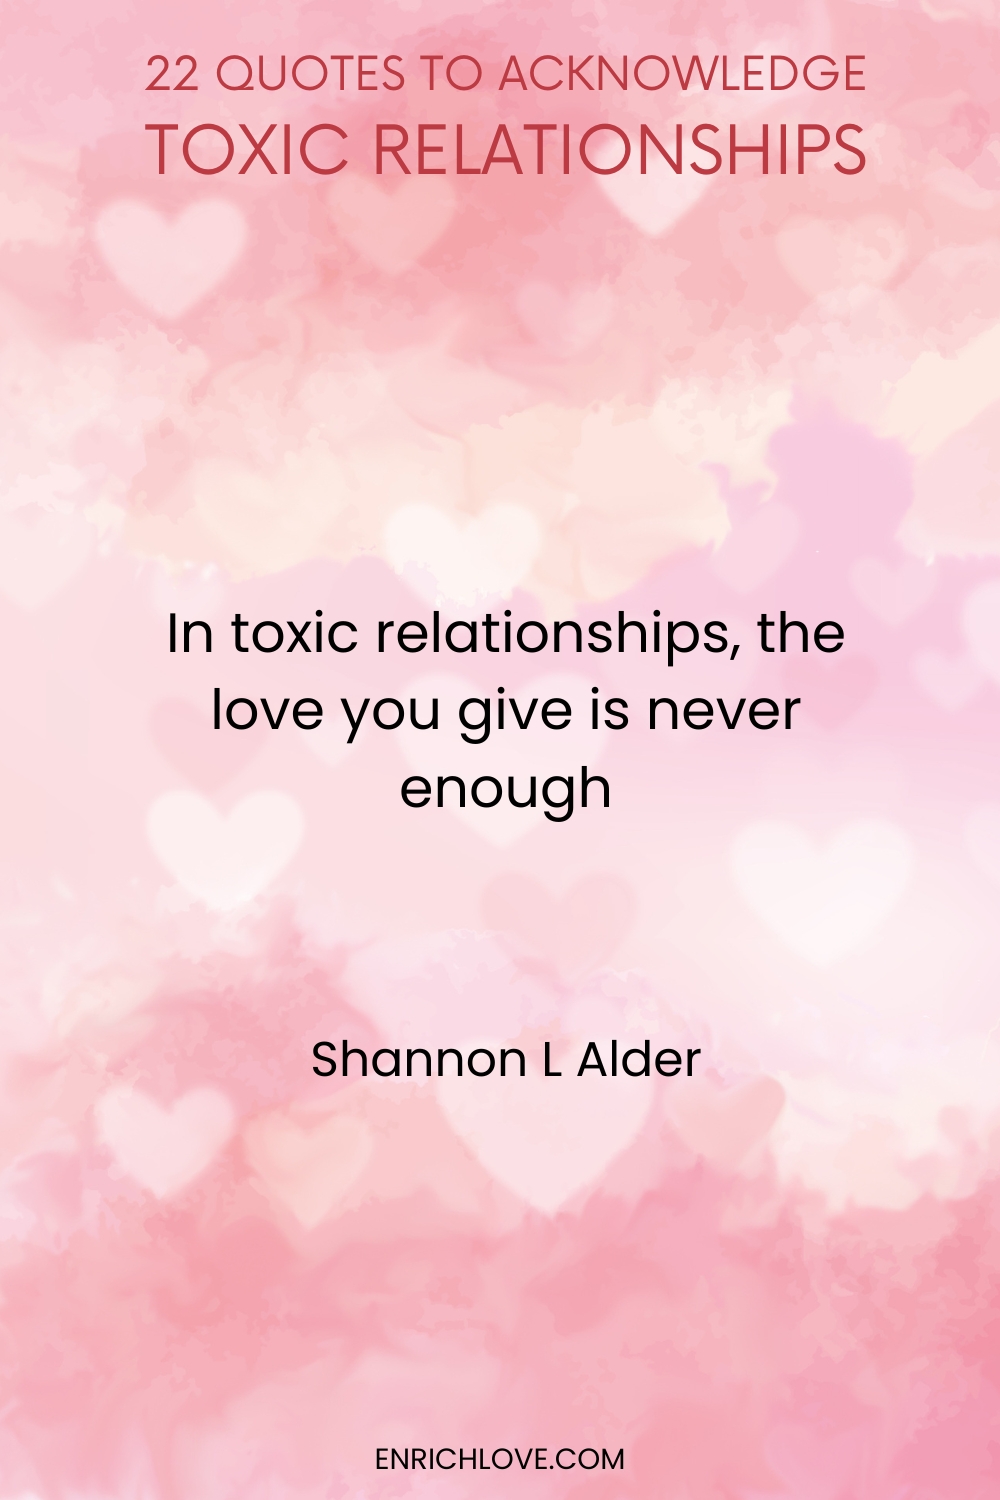 22 Quotes to Acknowledge Toxic Relationships -In toxic relationships, the love you give is never enough by Shannon L Alder